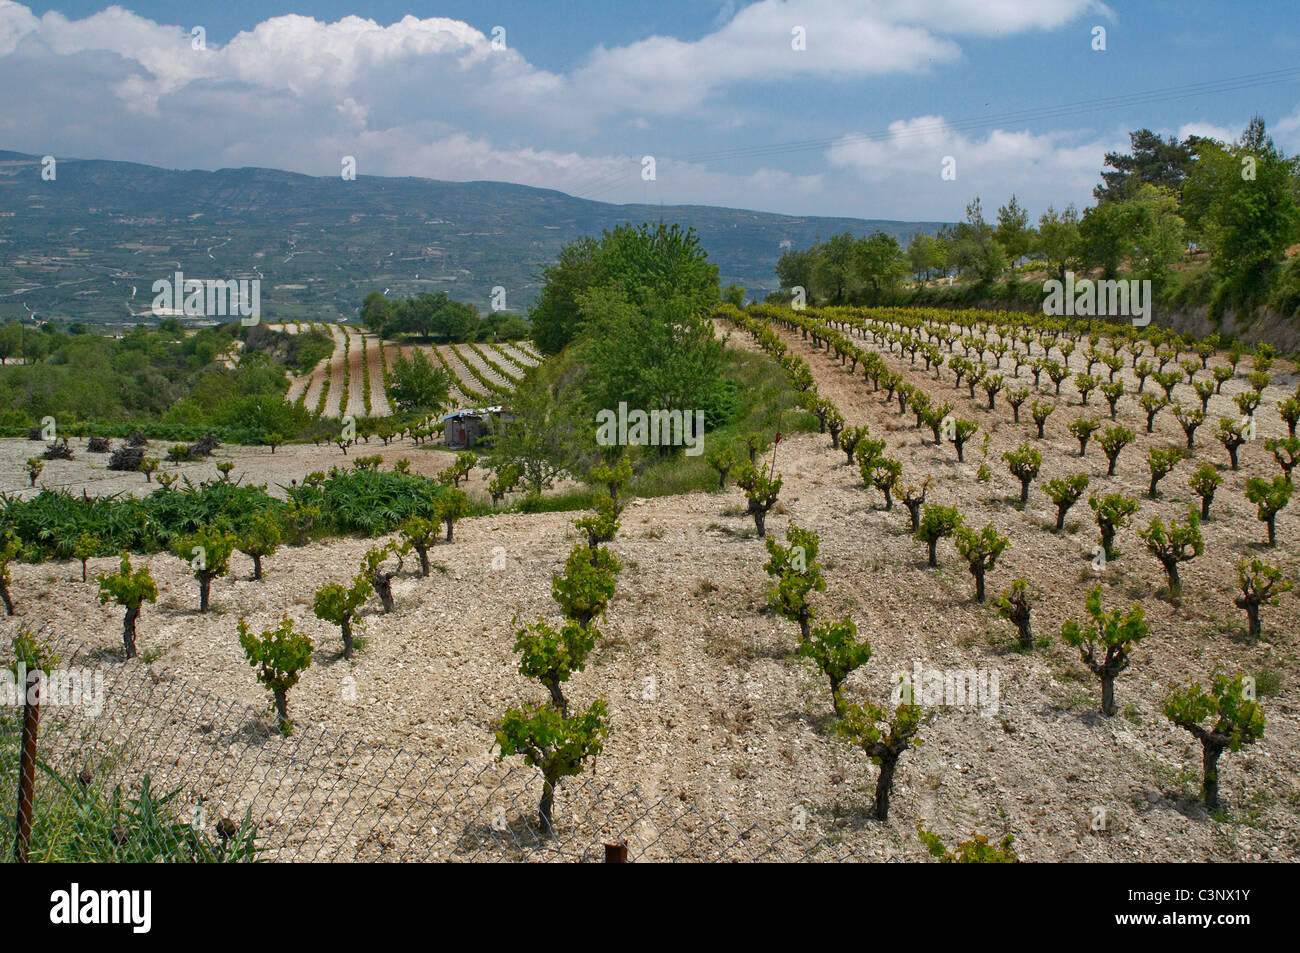 An immaculate vineyard of Cabinet vines in the wine growing region of the Troodos Mountains Stock Photo